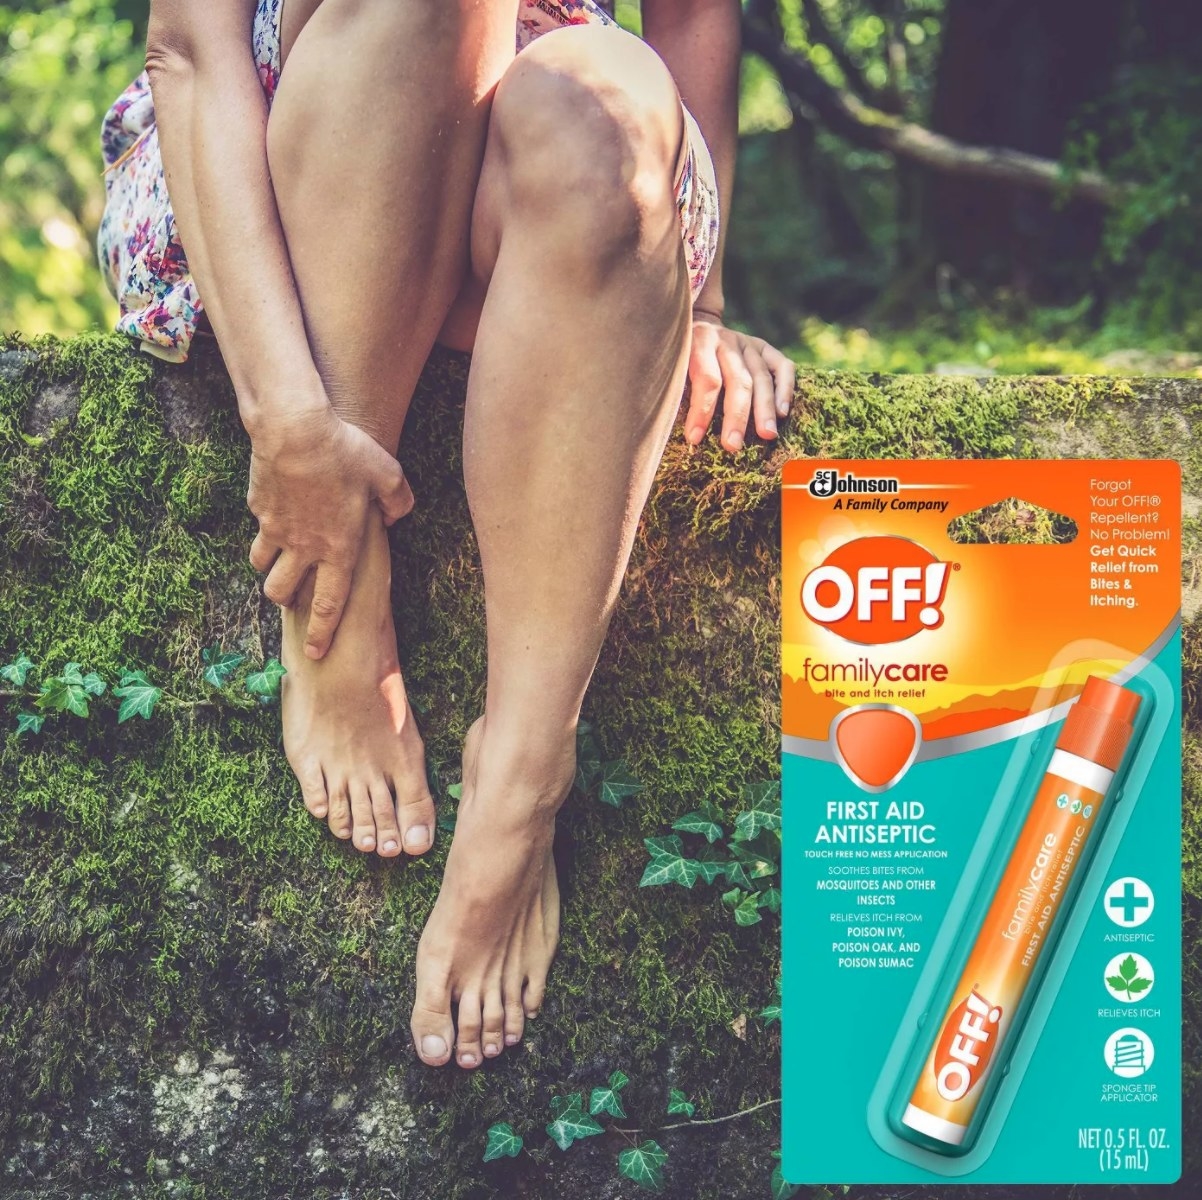 A model holding her foot next to an image of the Off! packaging